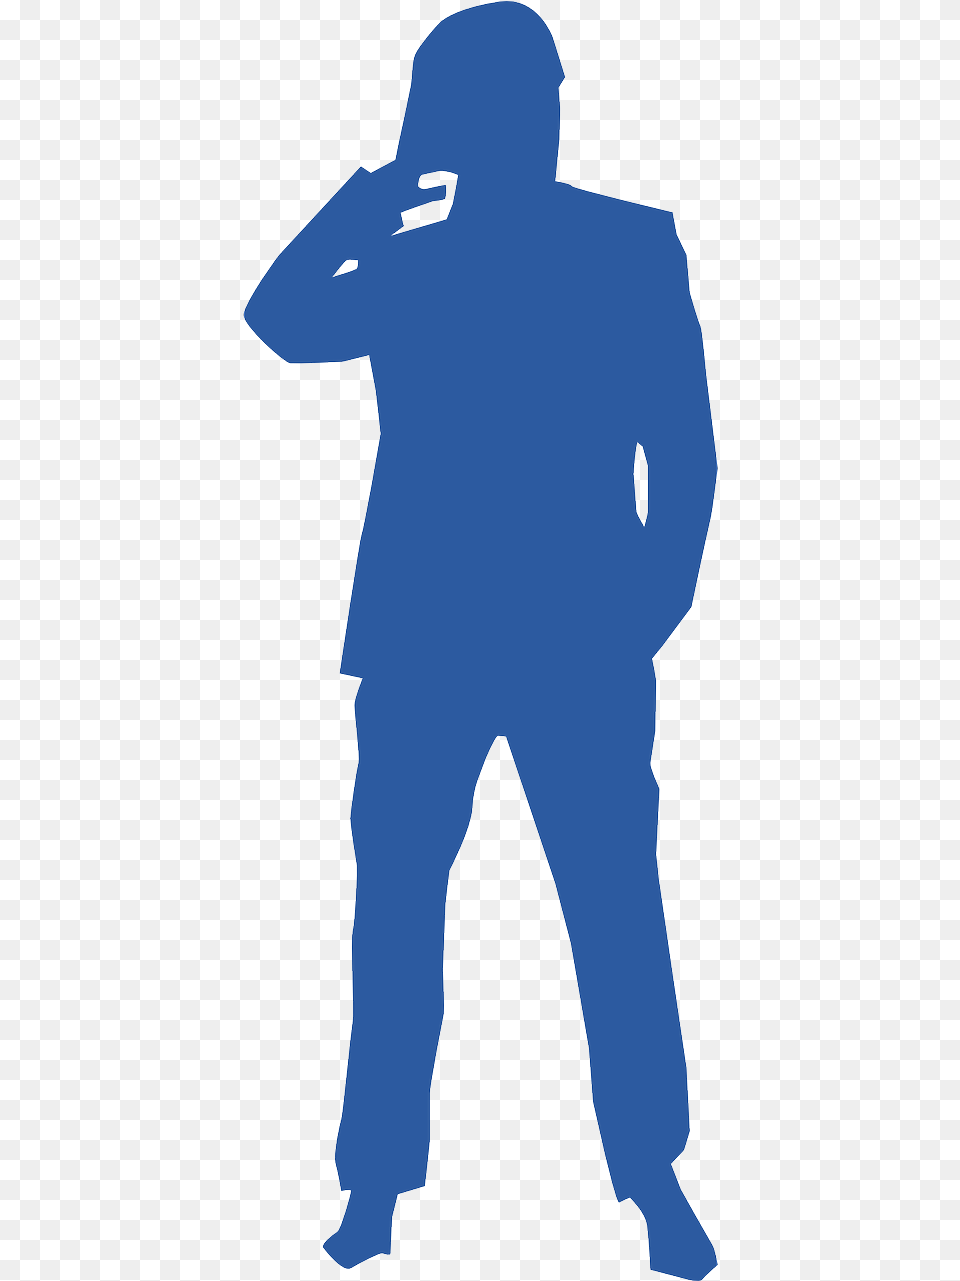 Blue Man Silhouette, Clothing, Pants, Adult, Male Png